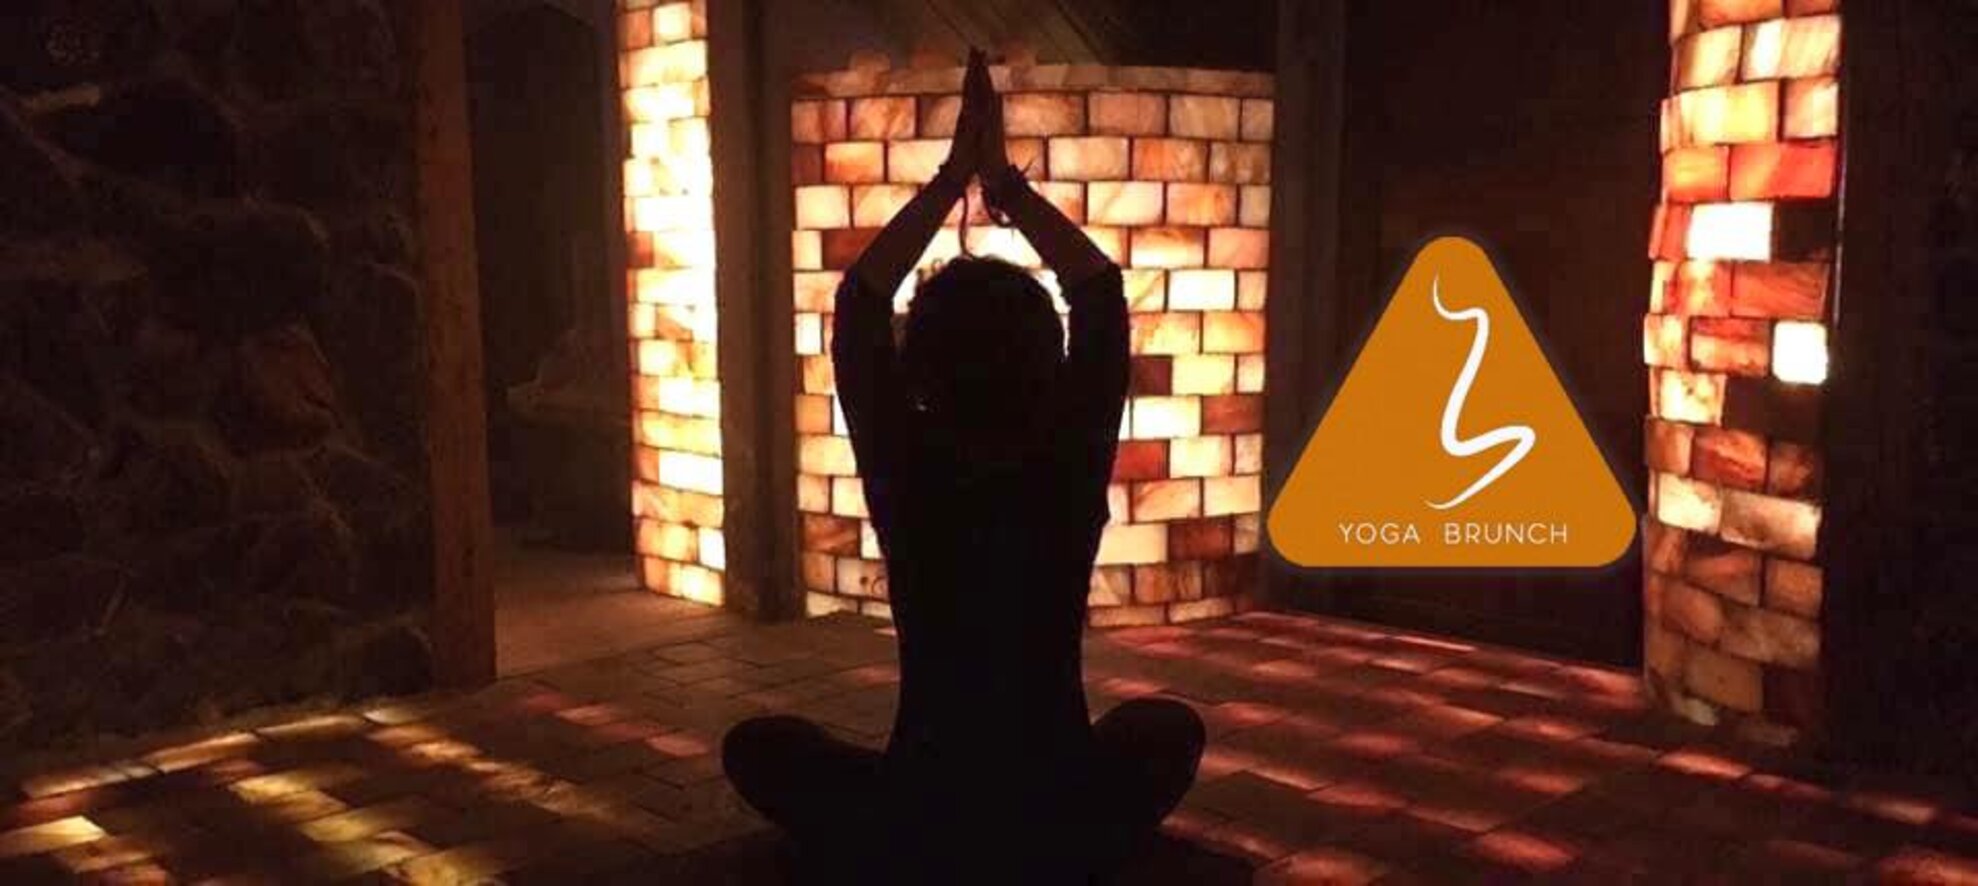 Cleansing yin yang flow yoga in a salt cave